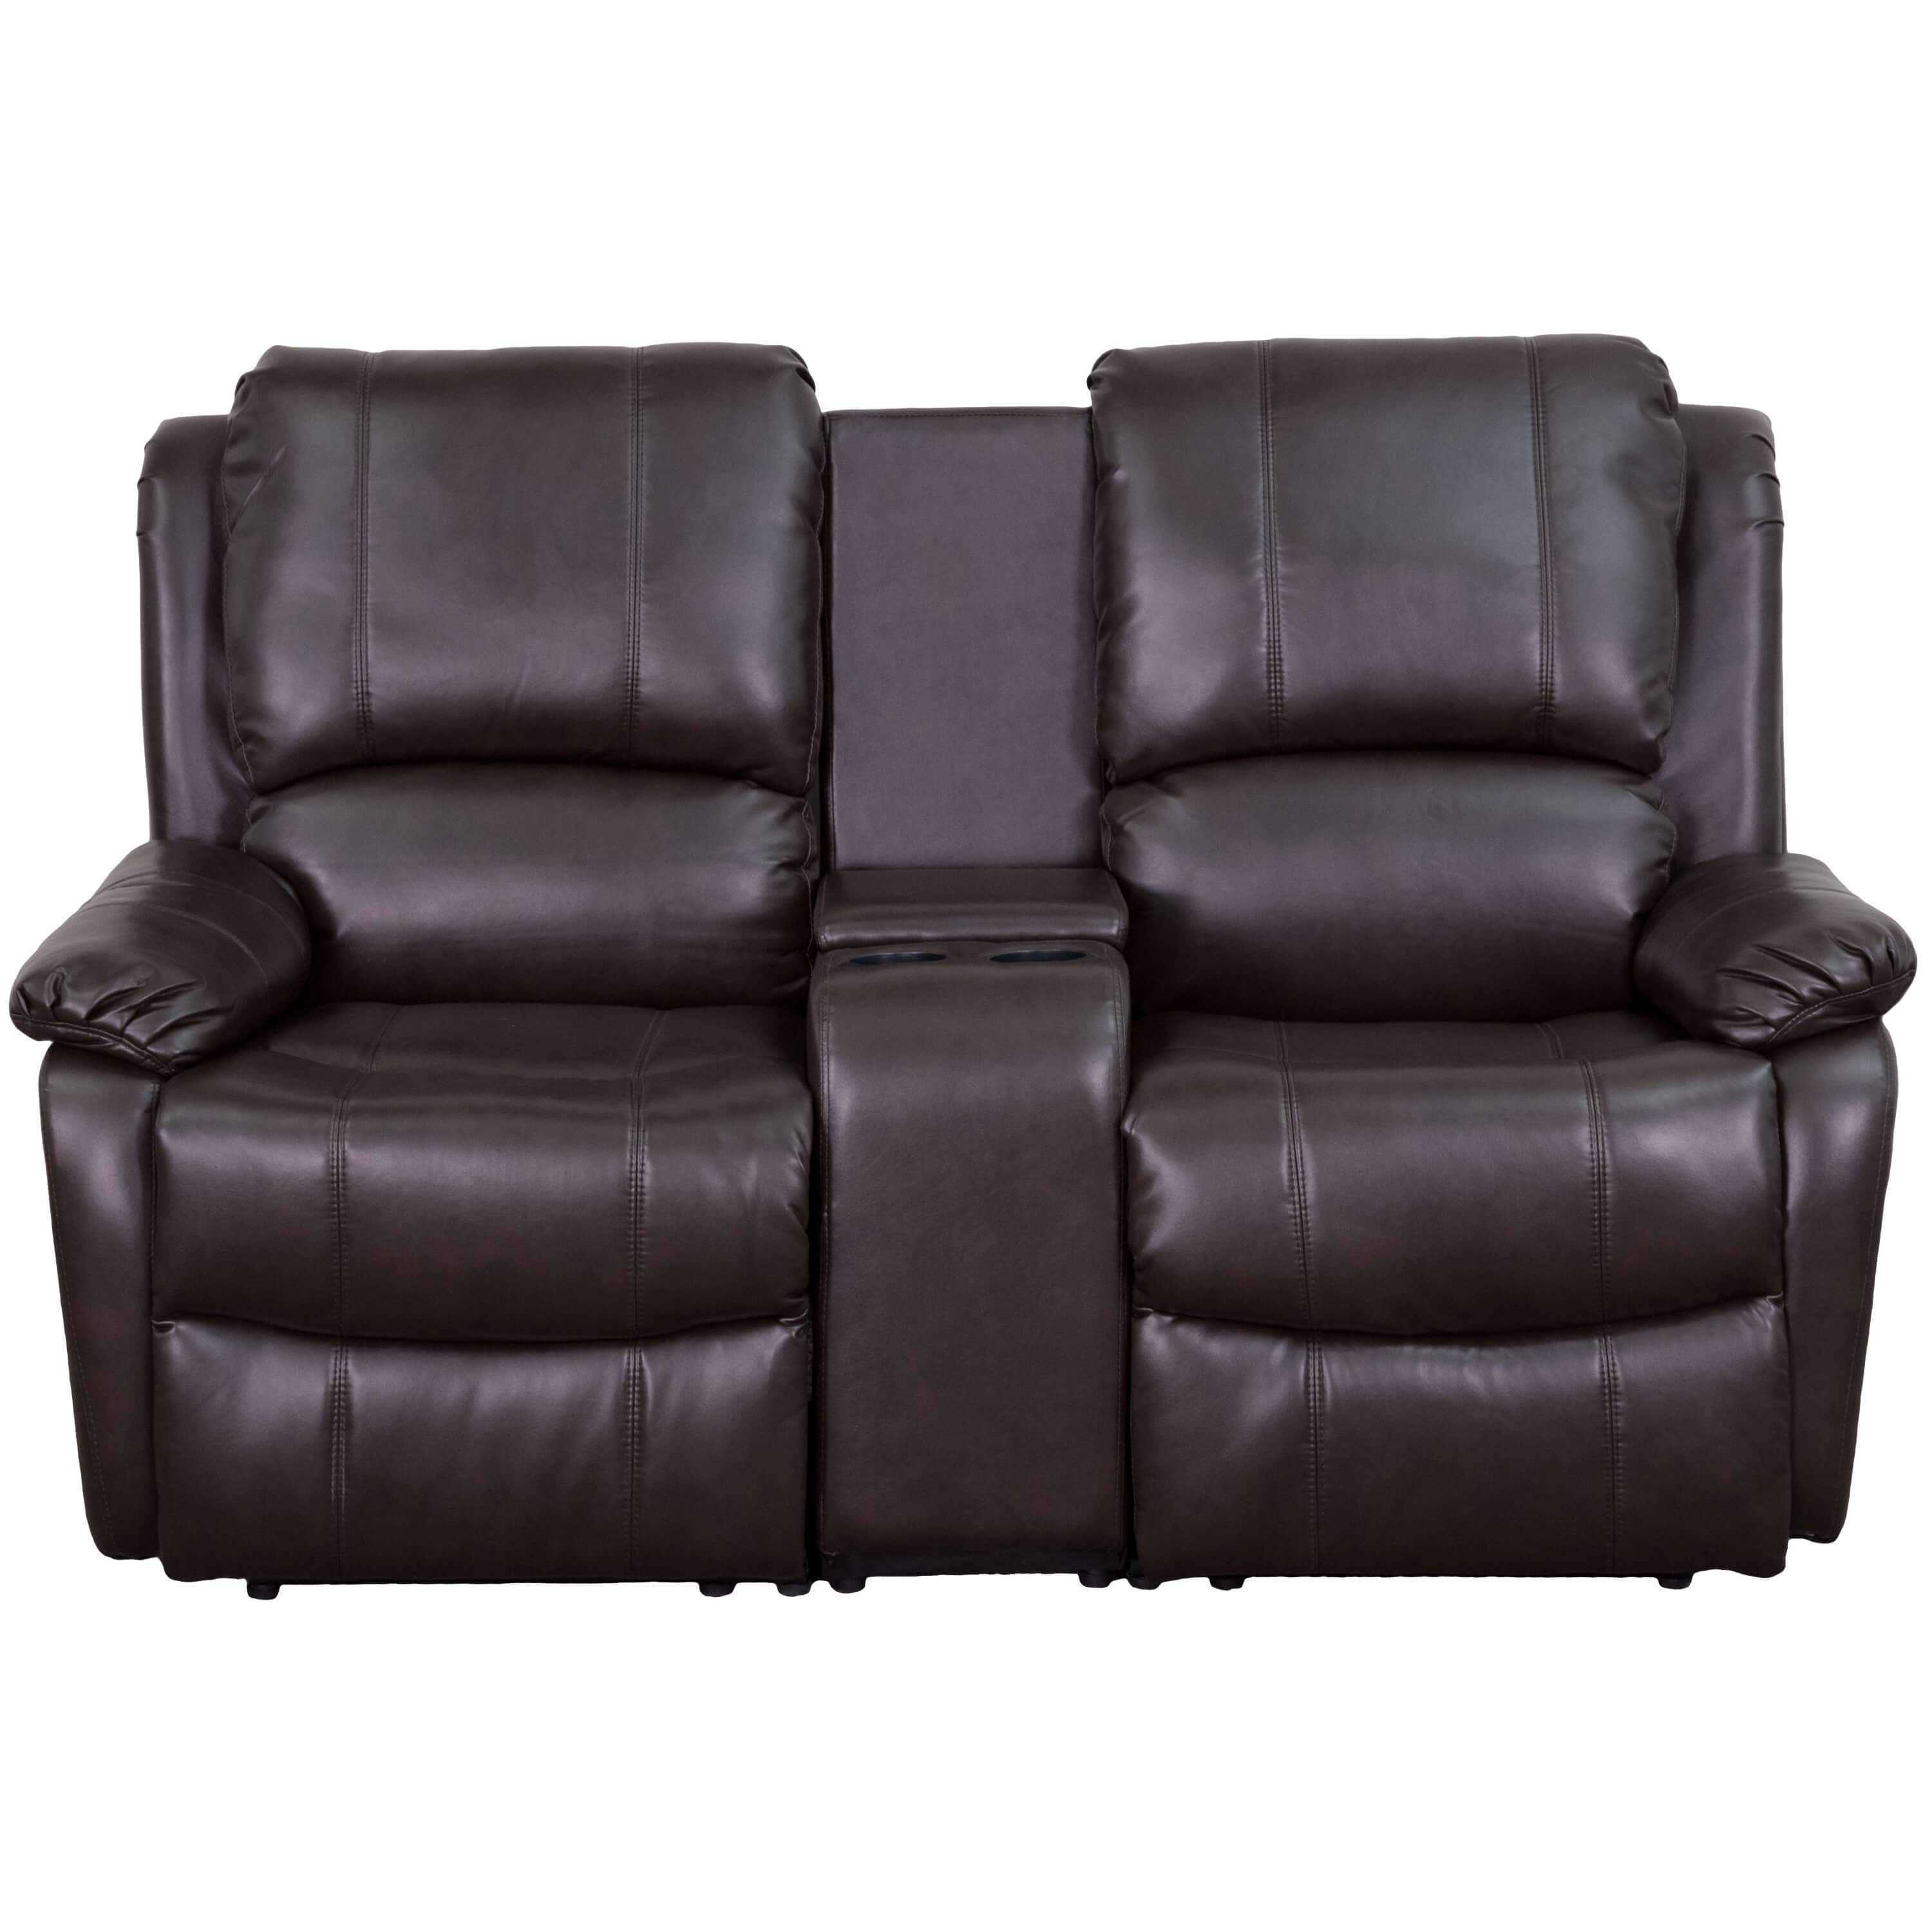 Home Theater Recliners Bergman Recliner Chair with Cup